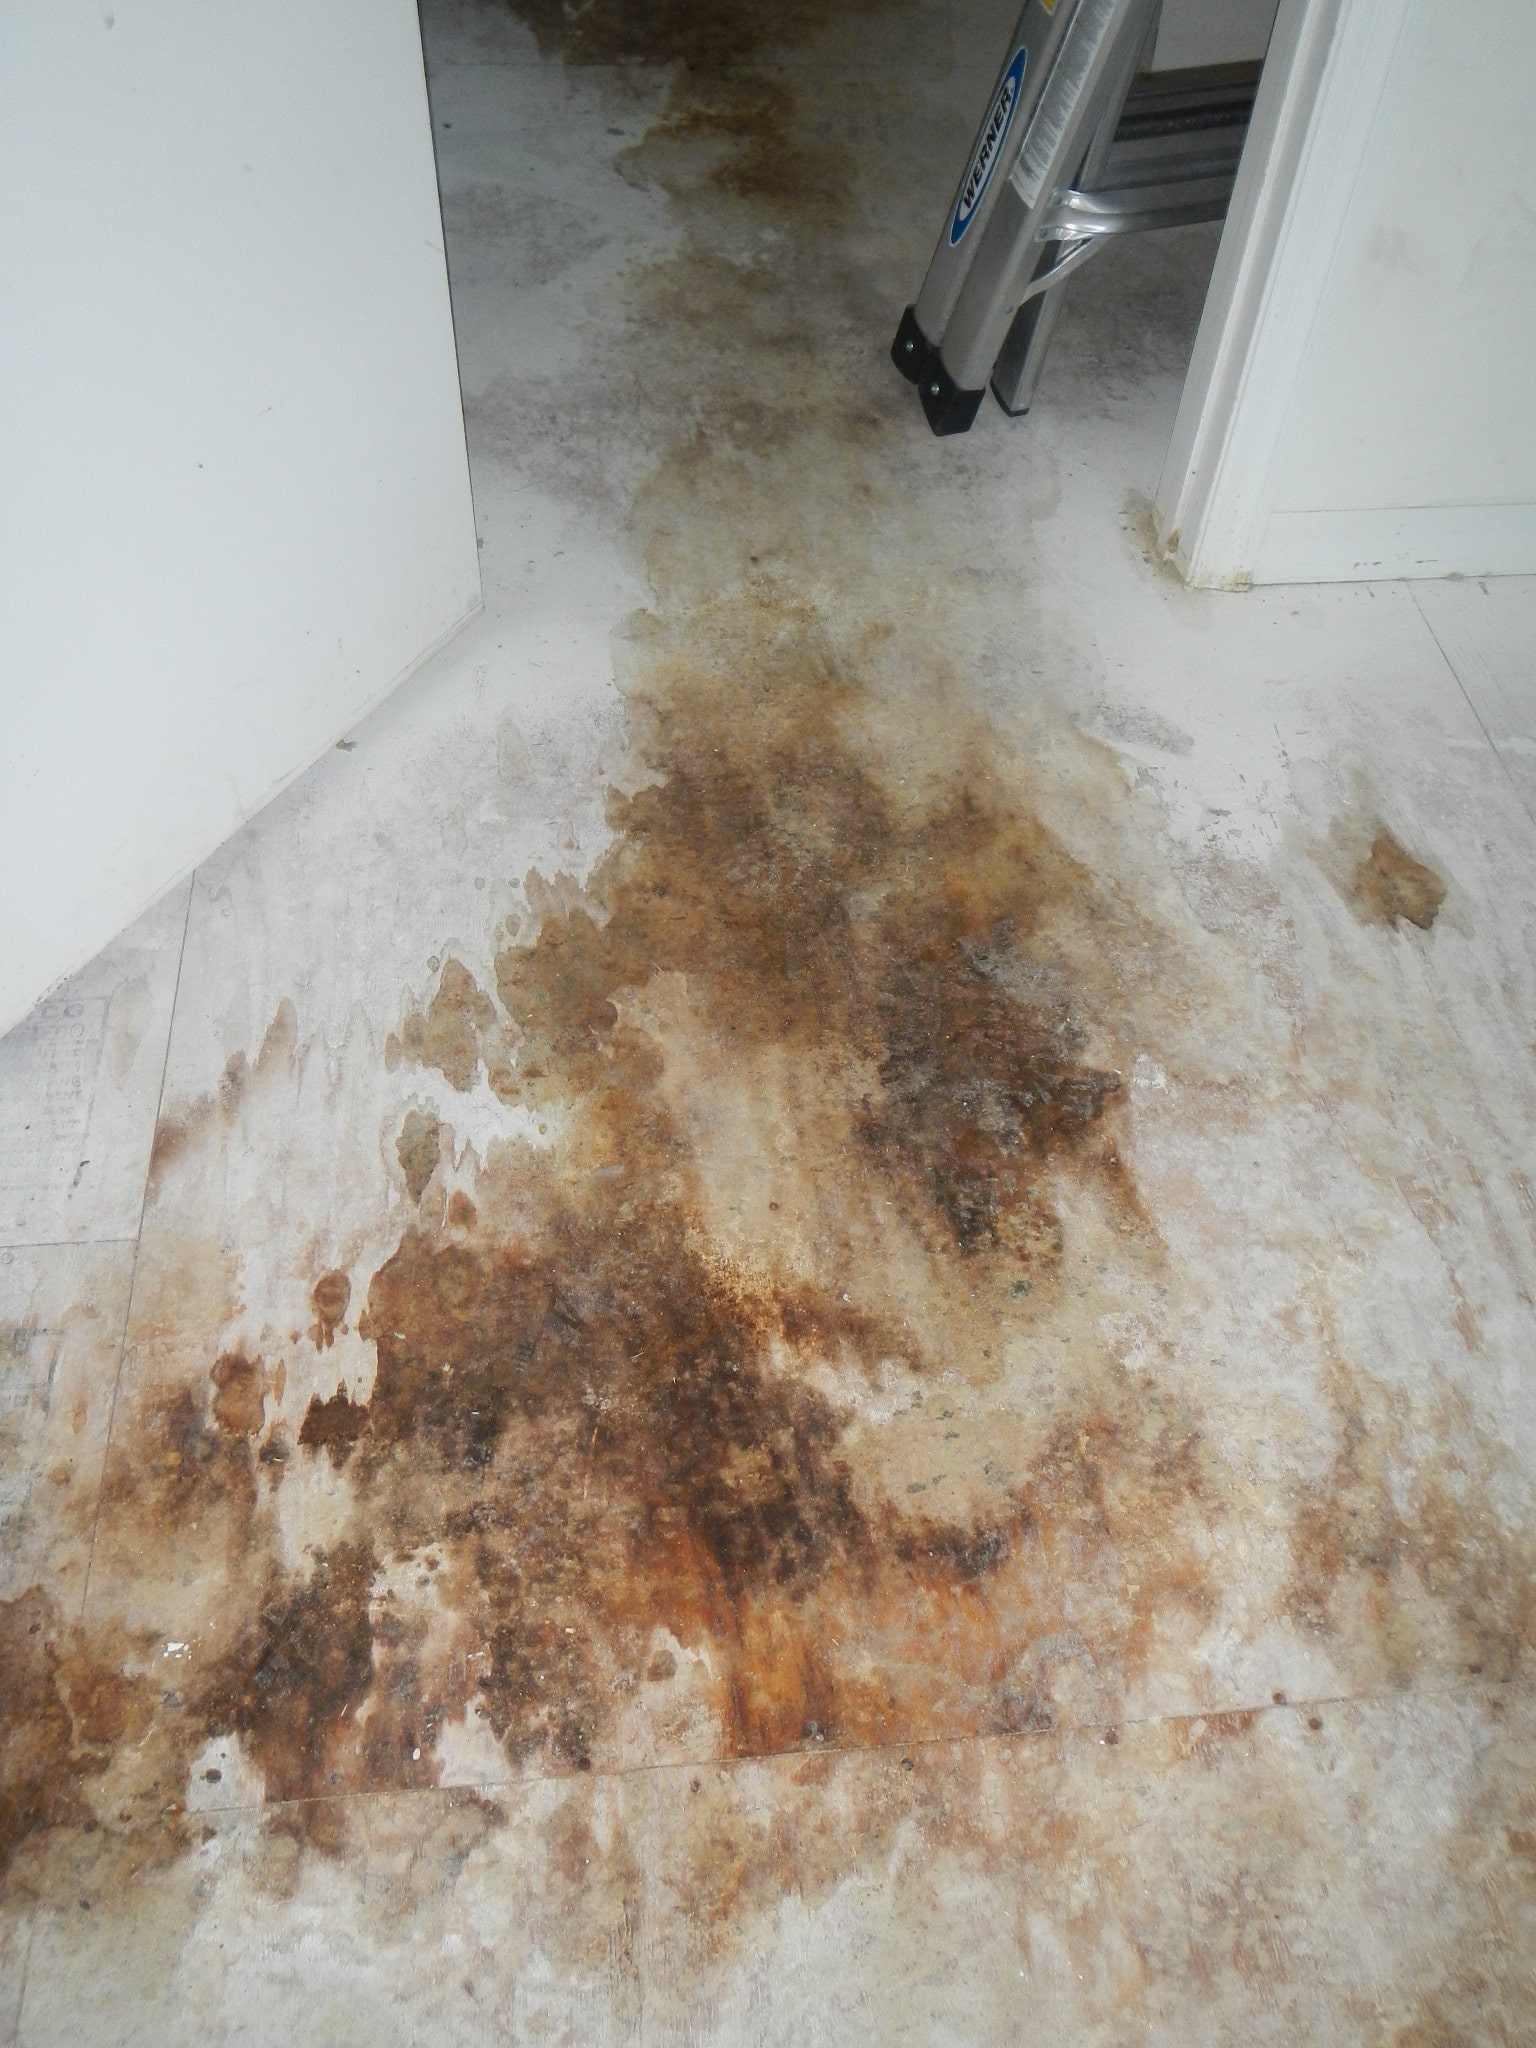 Does Your Home Need a Mold Inspection? We Can Help!